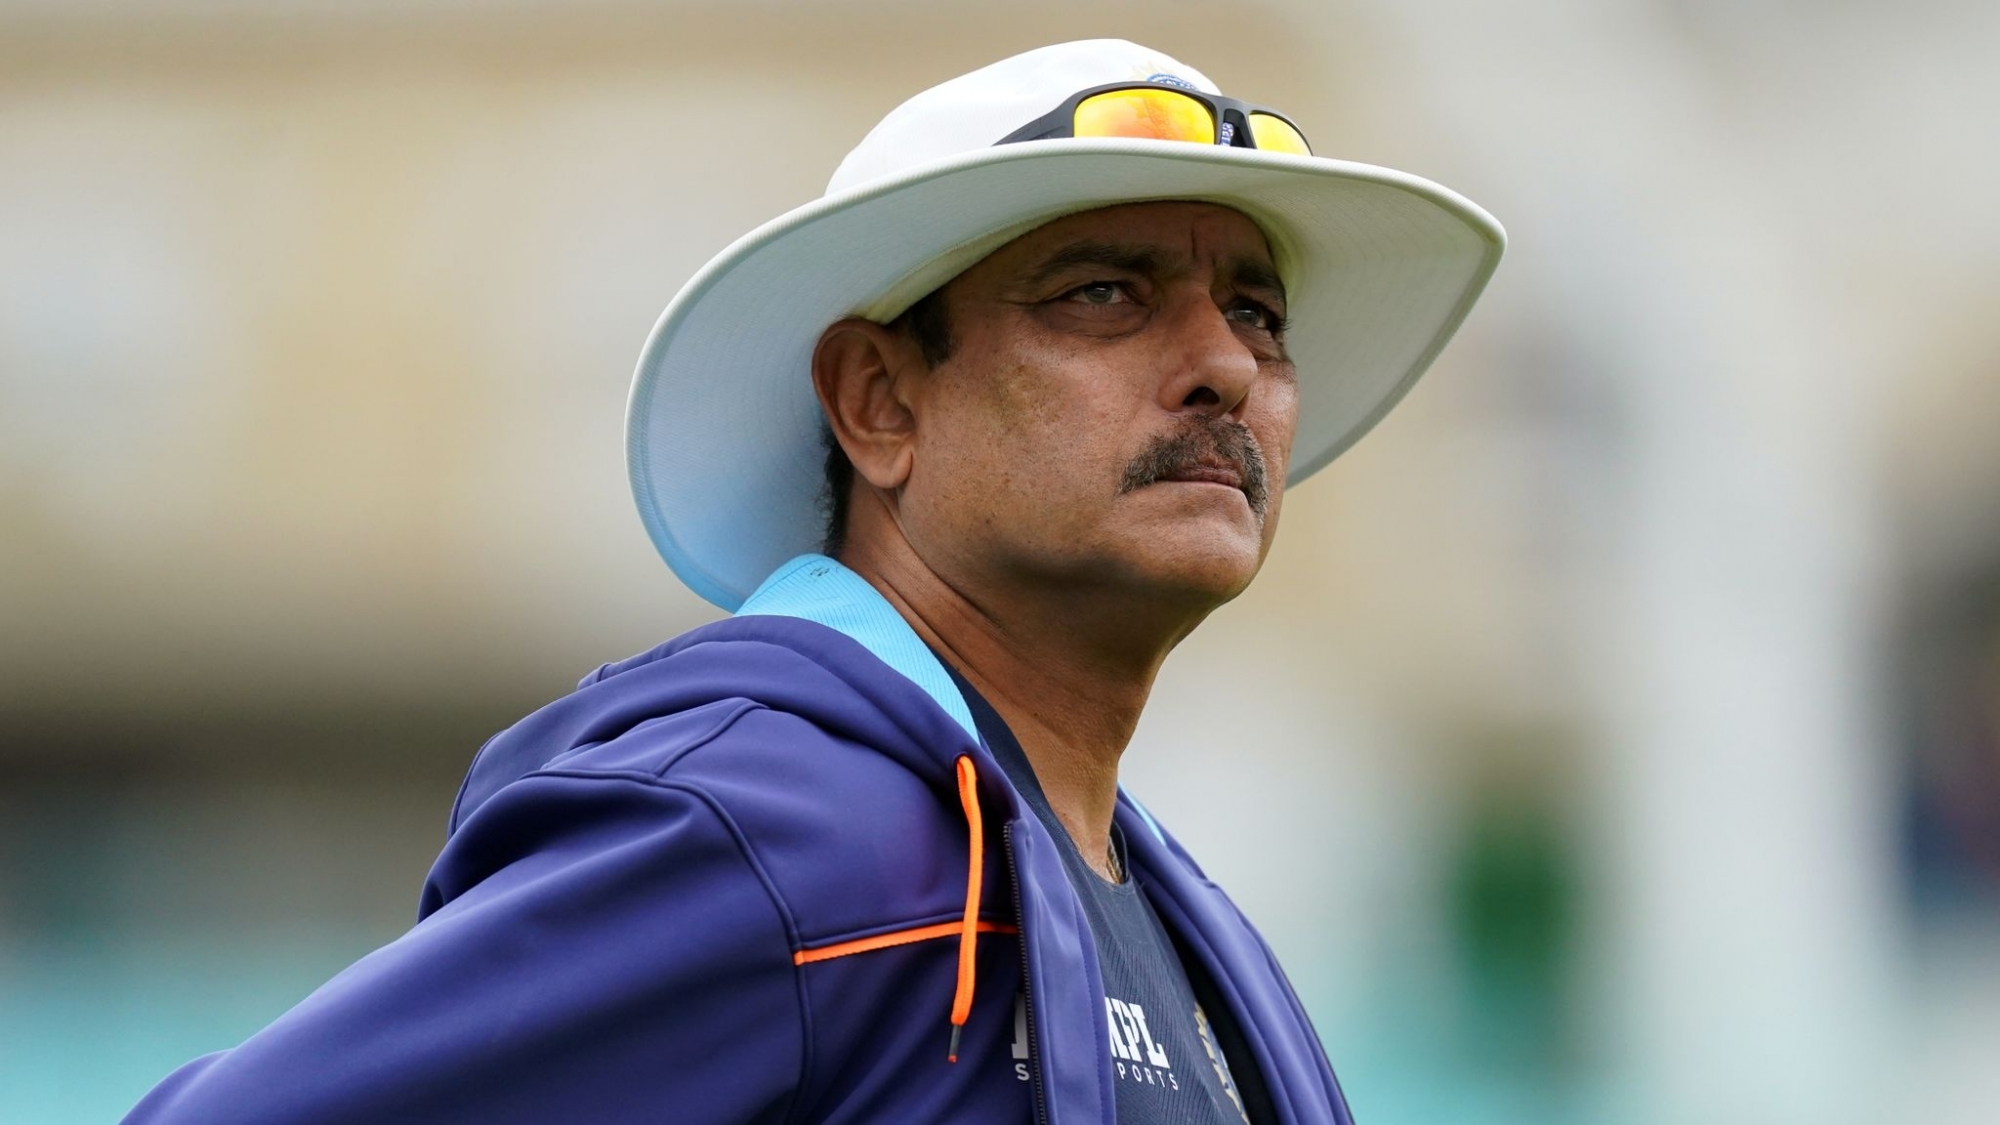 Ravi Shastri says upcoming season of Legends Cricket League dedicated to 75th year of Independence celebration